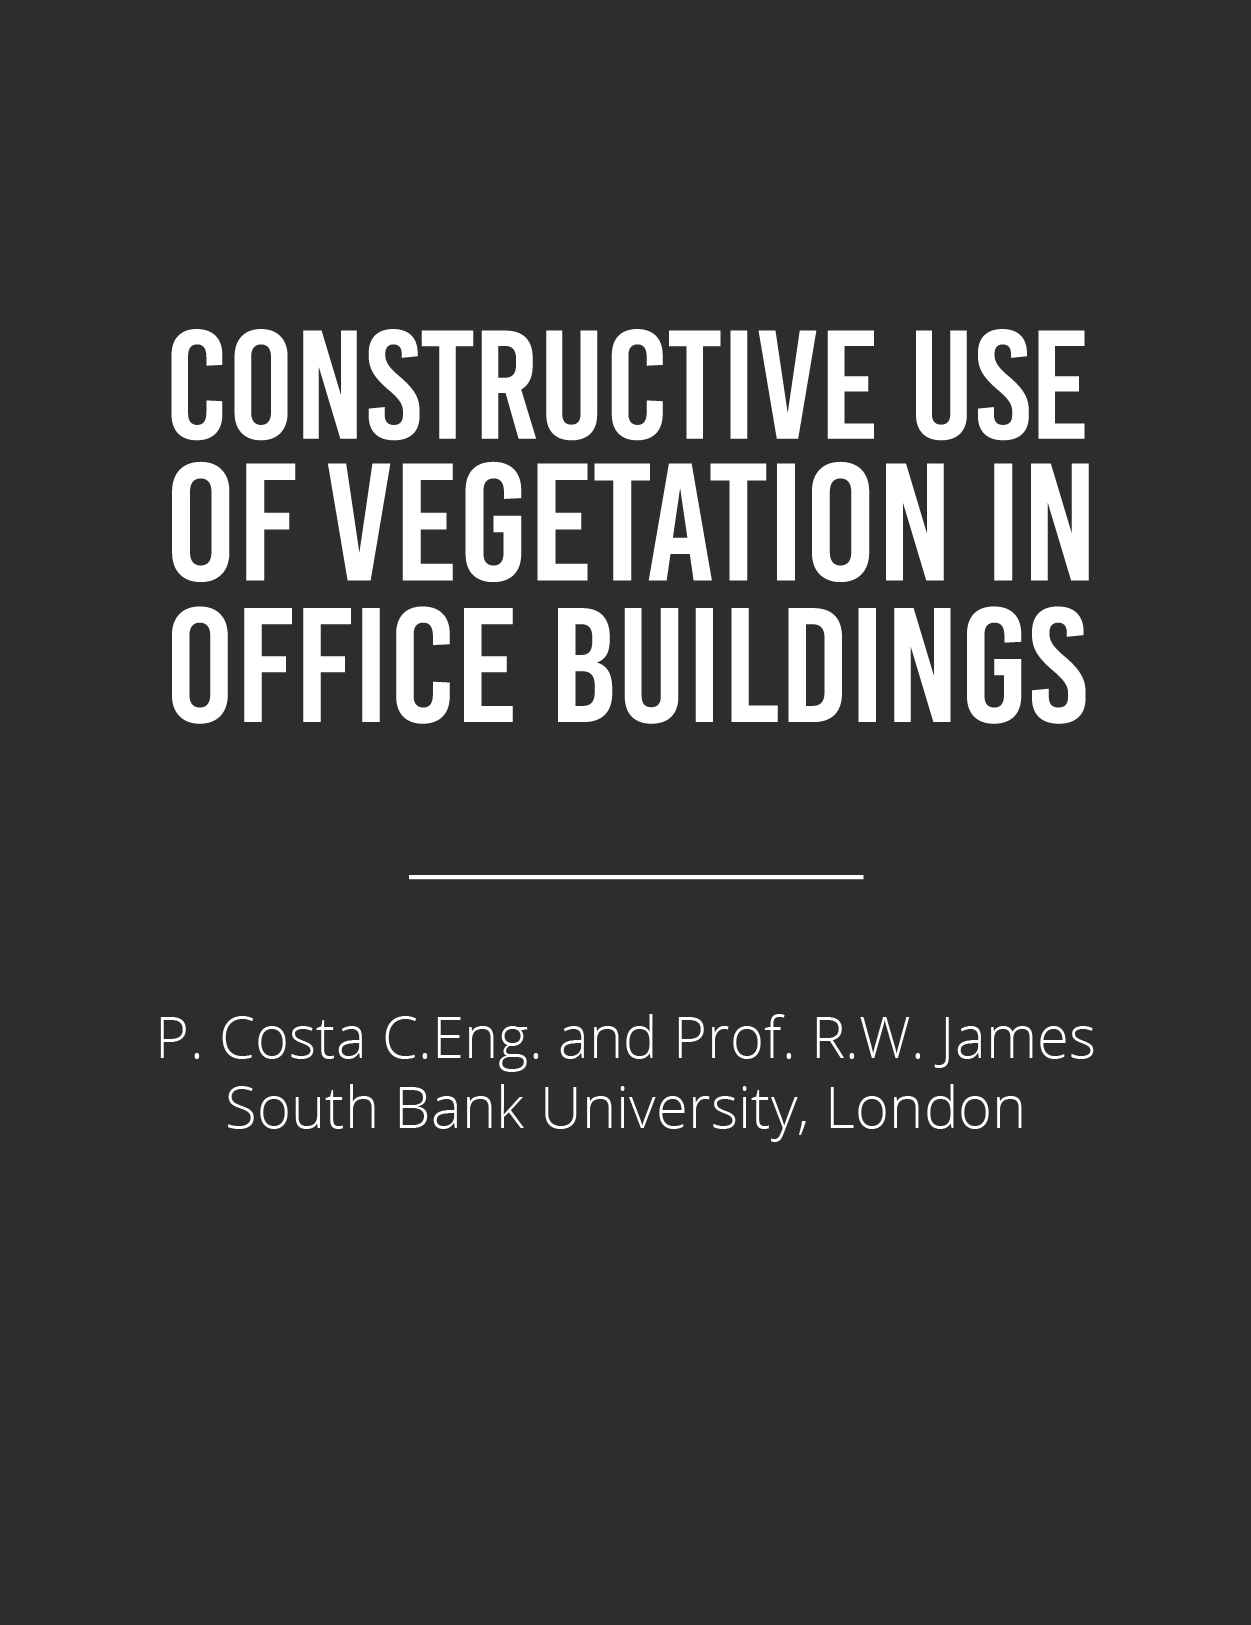 Constructive Use of Vegetation in Office BuildingsFeatured Image